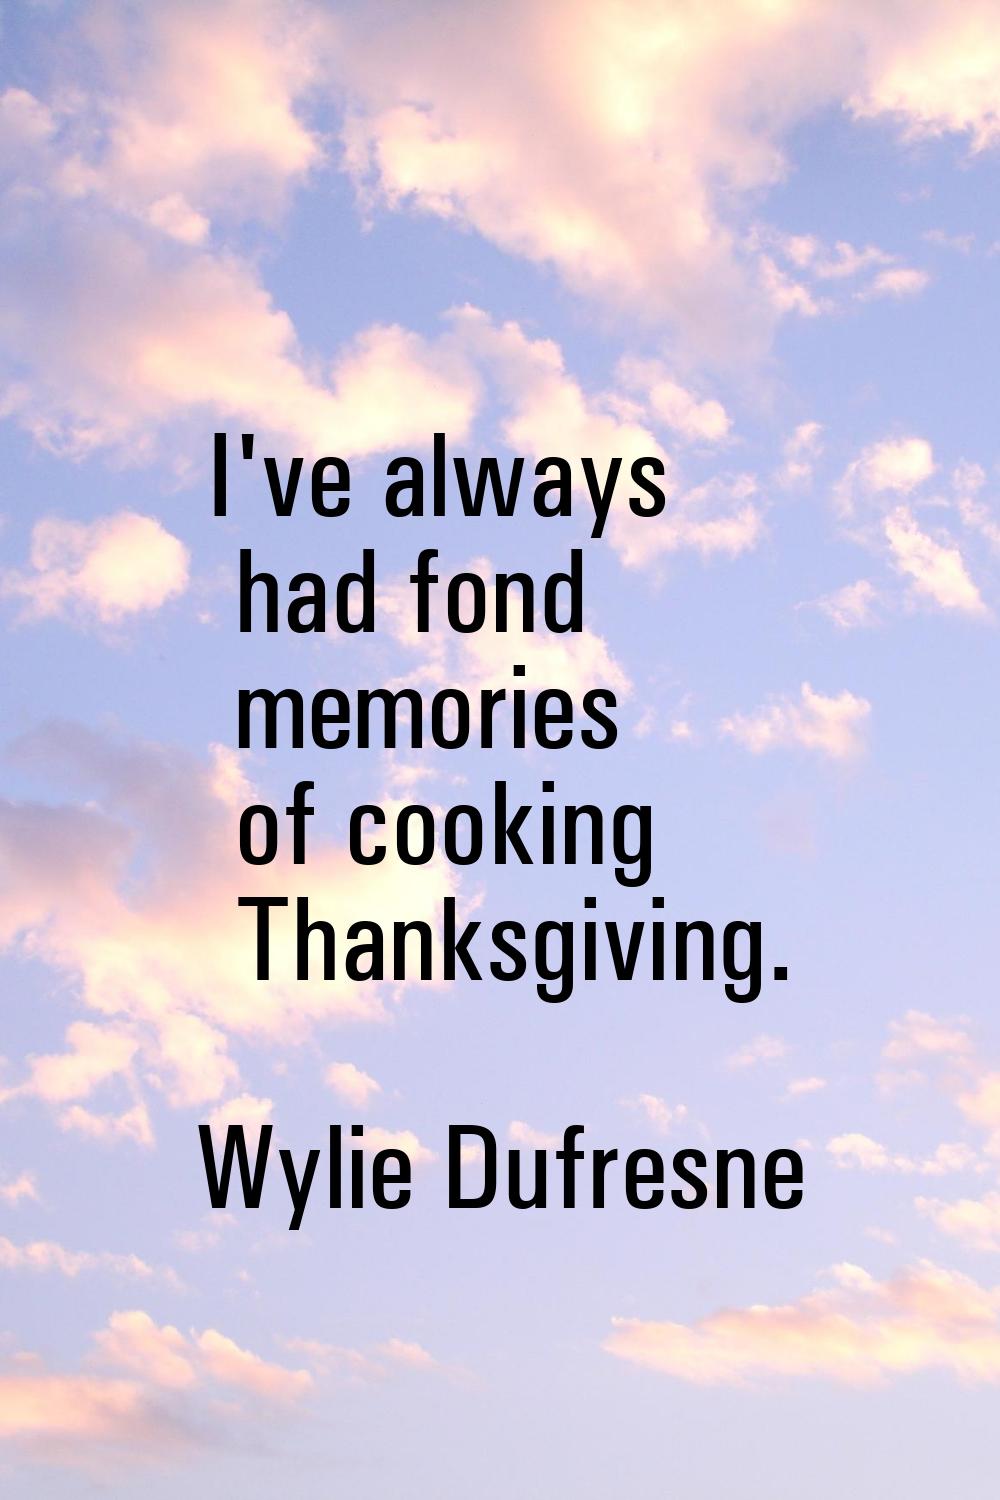 I've always had fond memories of cooking Thanksgiving.